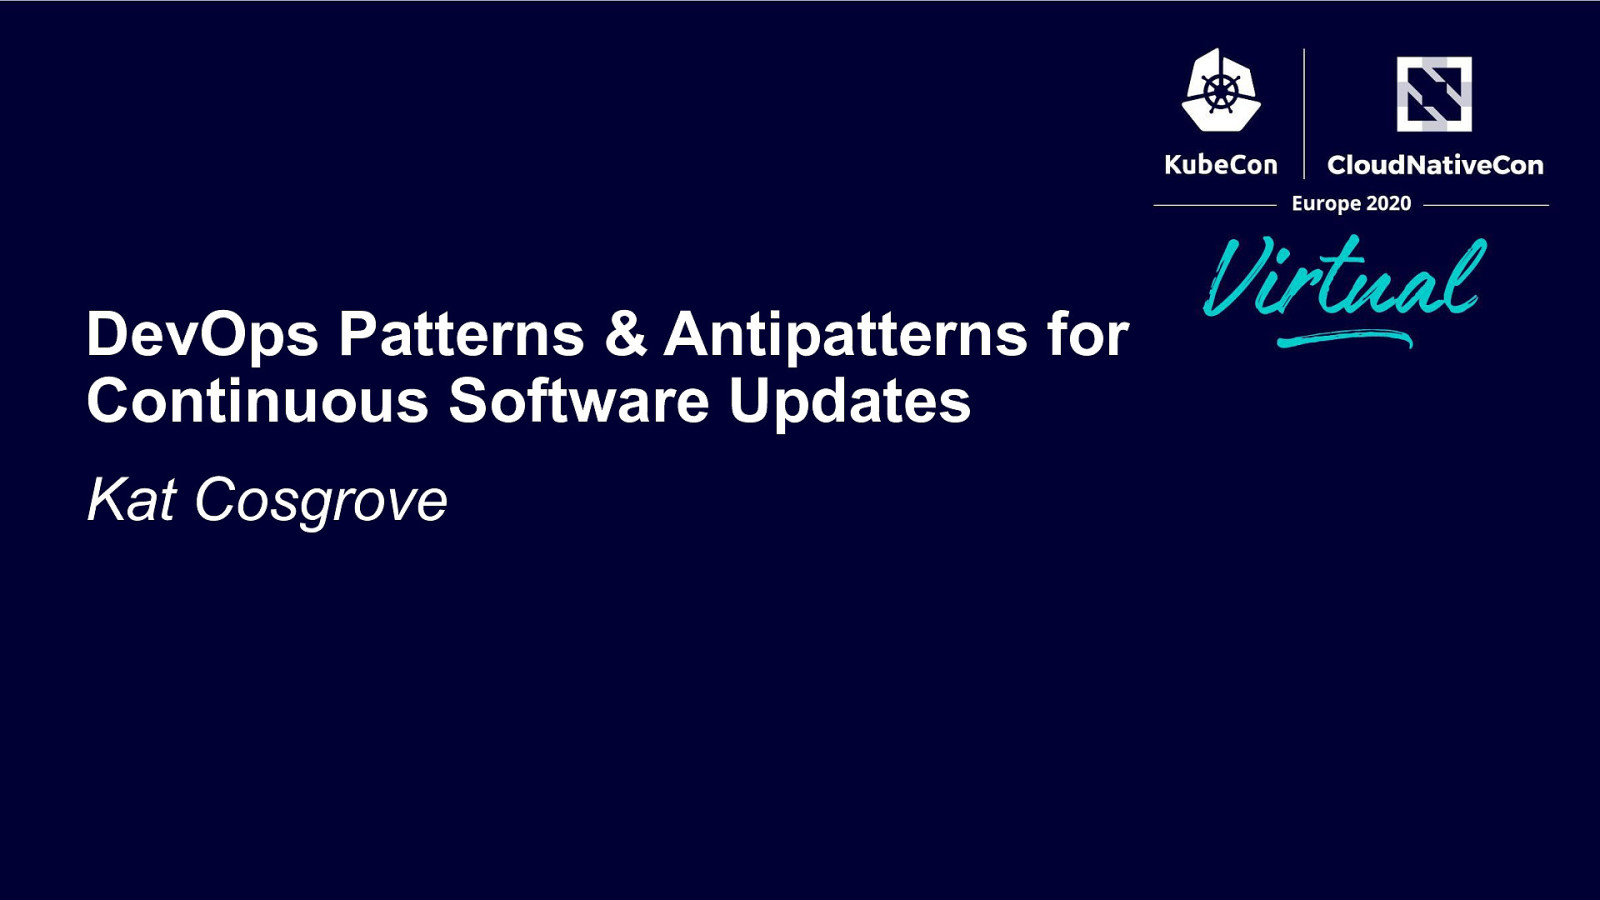 DevOps Patterns and Antipatterns for Continuous Software Updates